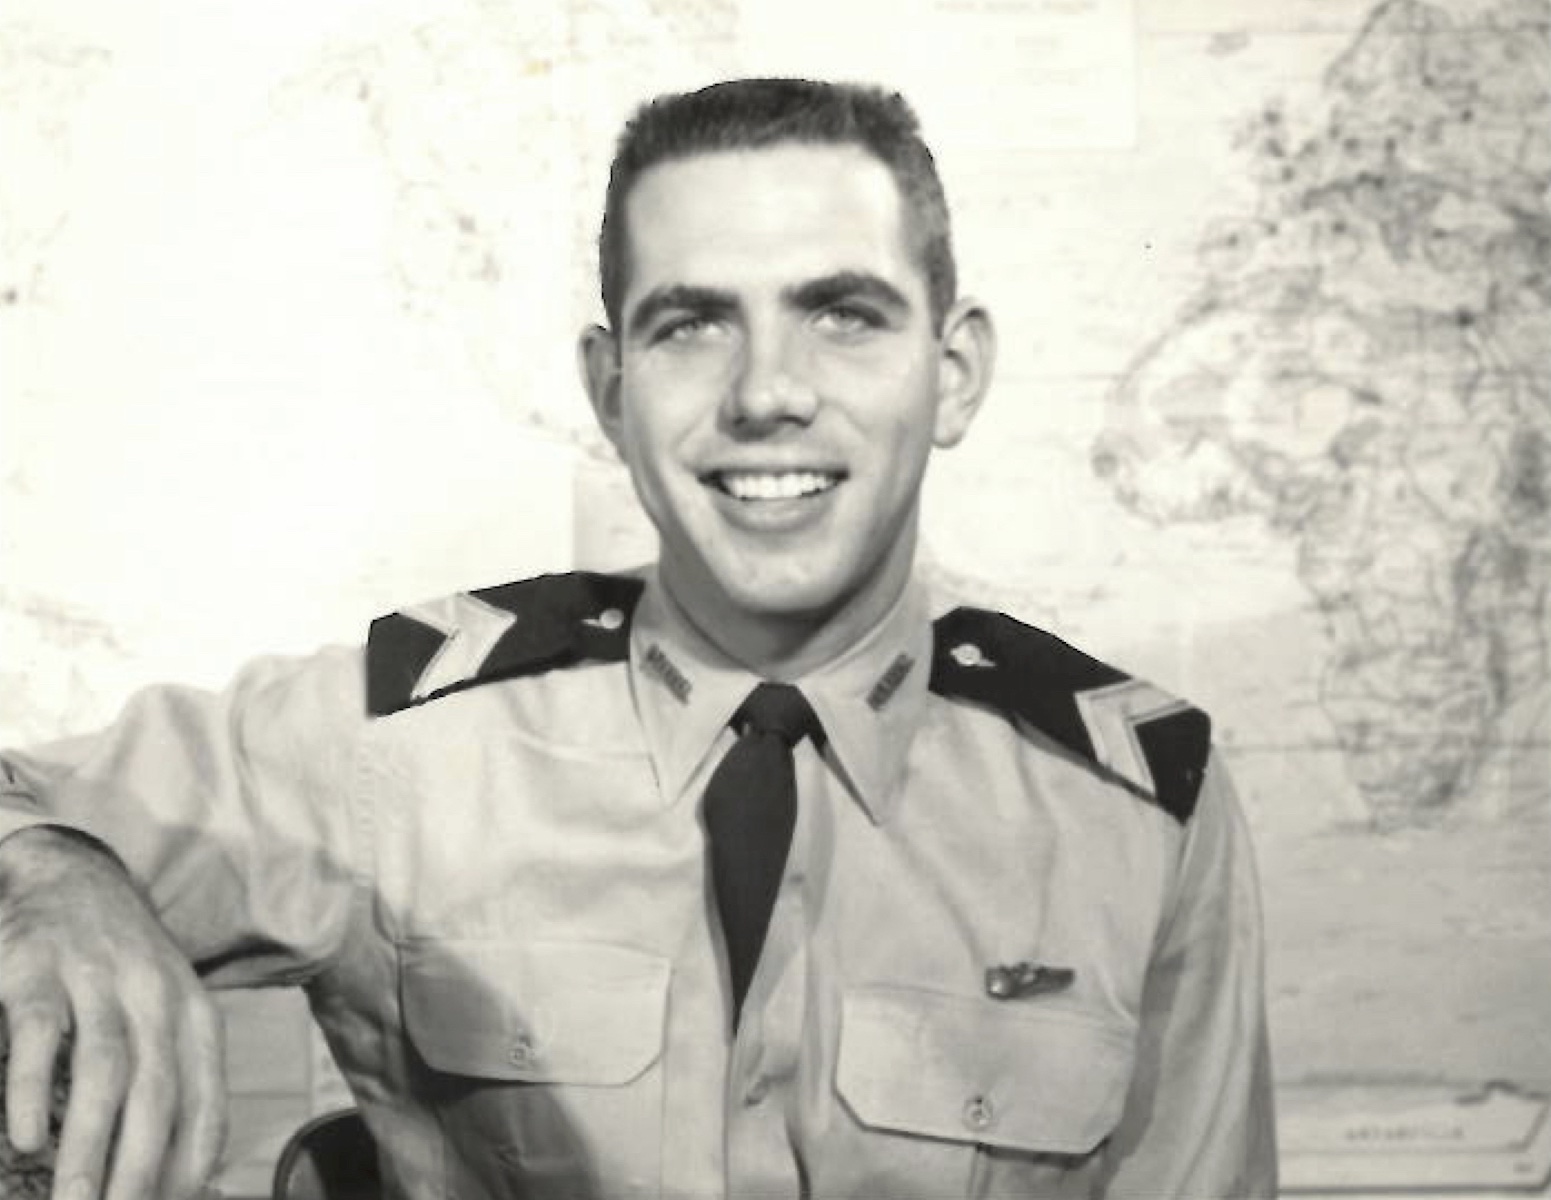 Chuck as an ROTC cadet in college.